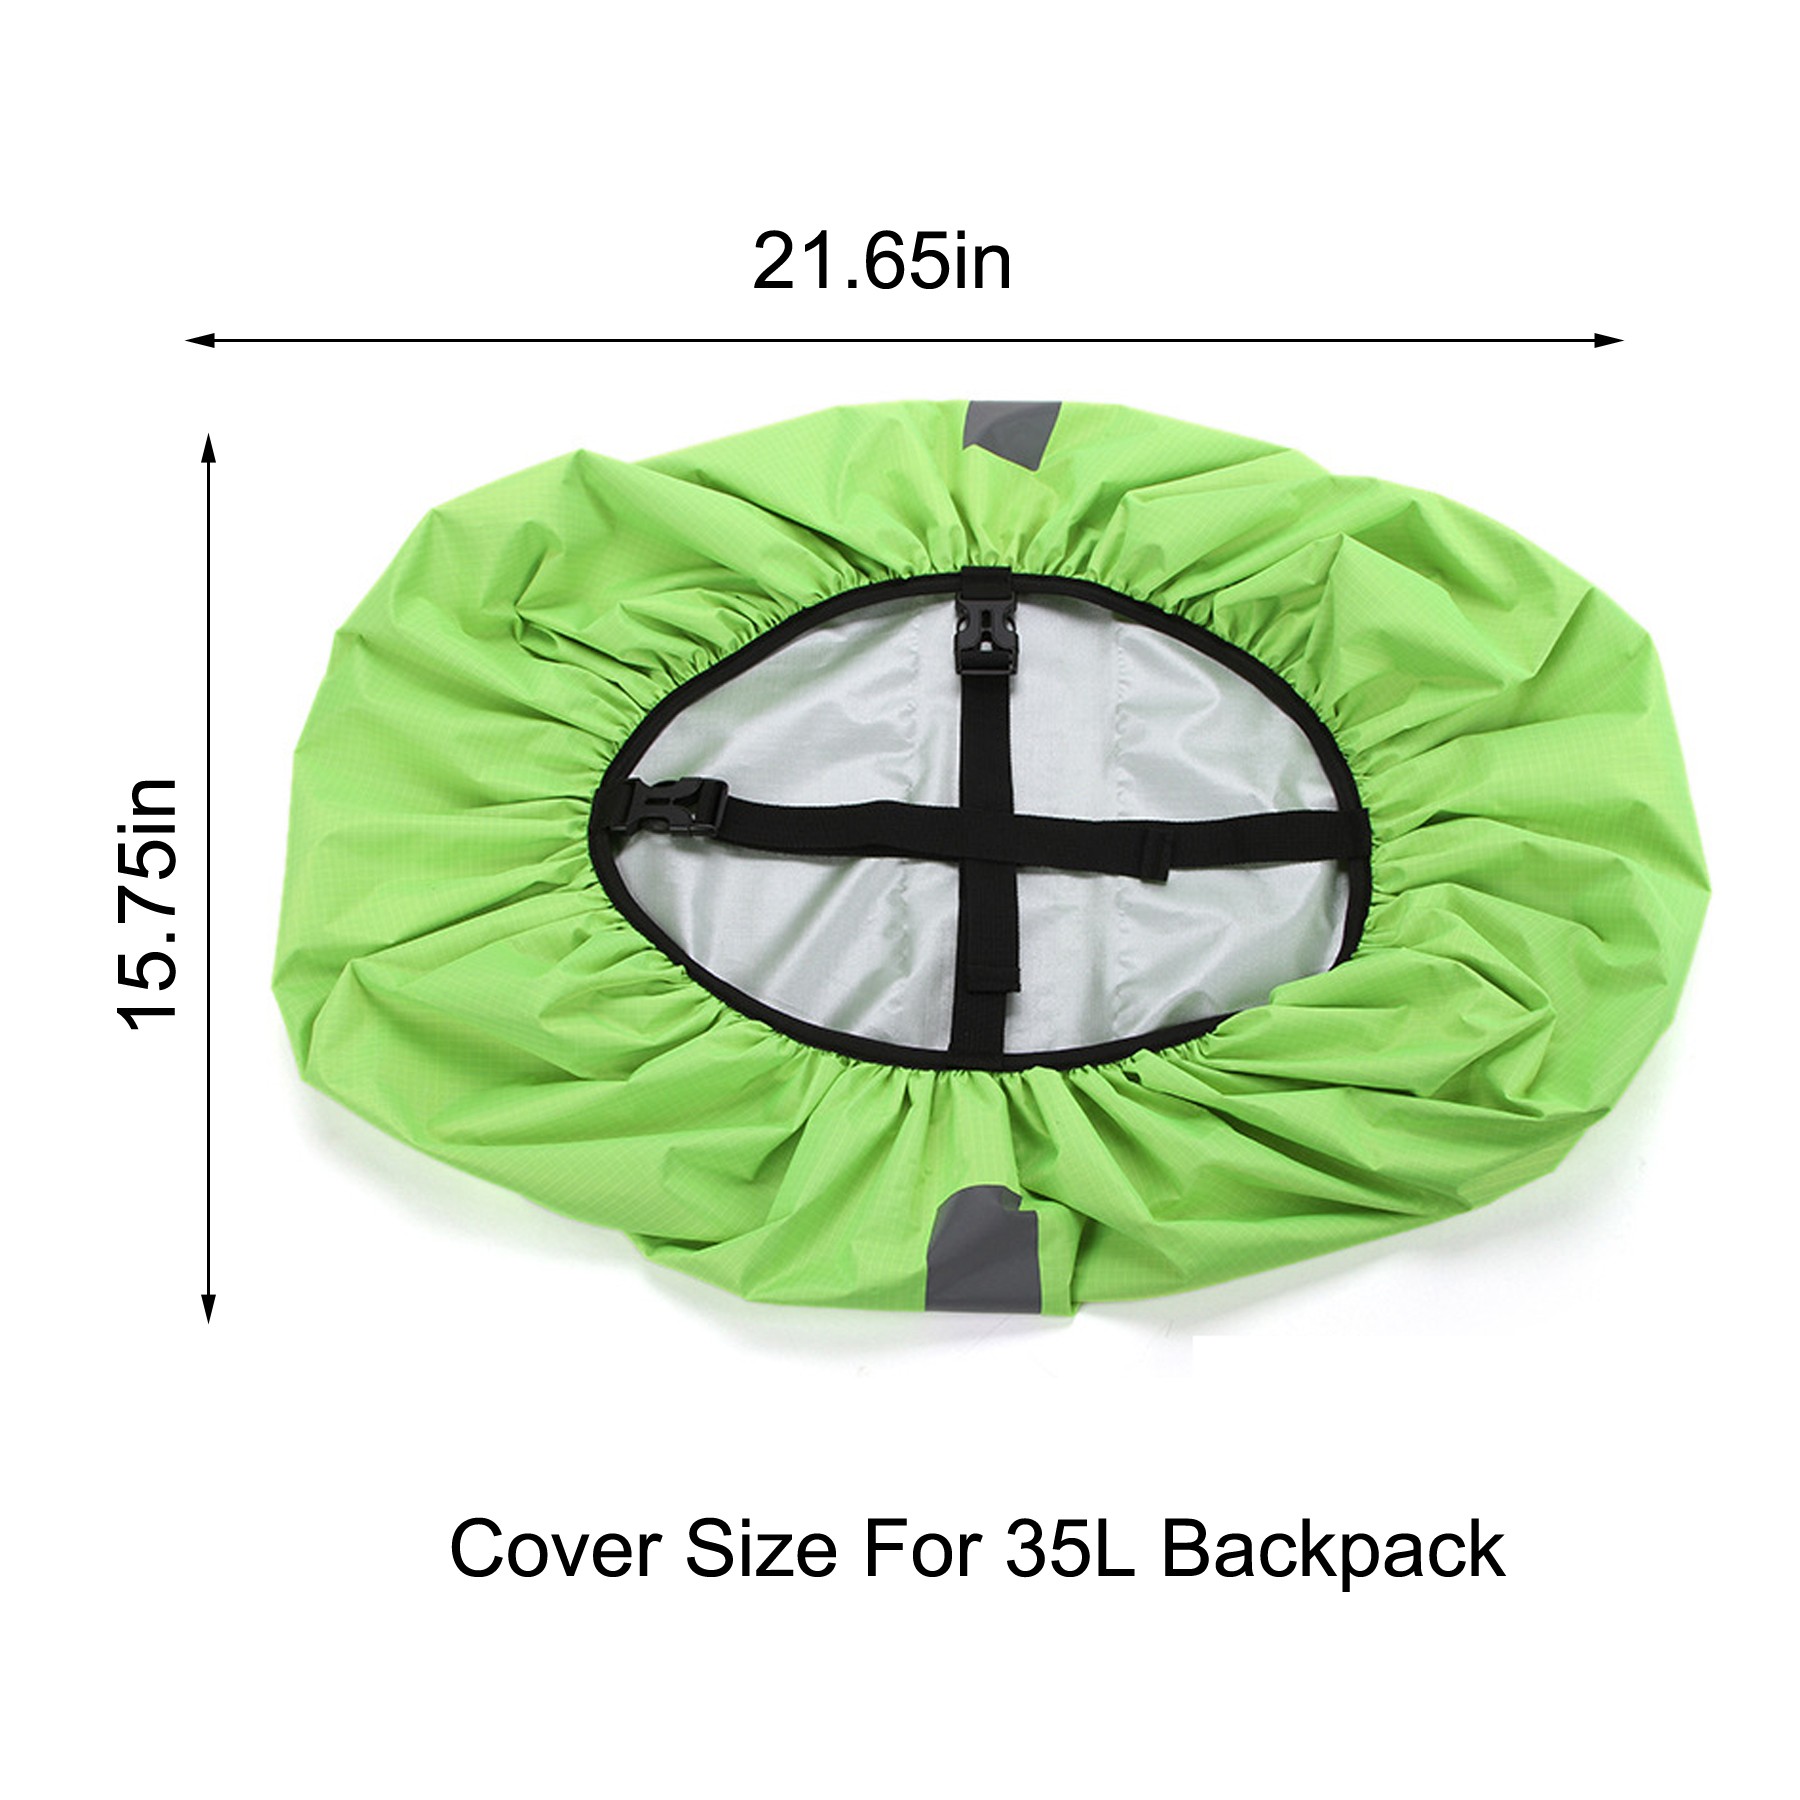 30-80L Backpack Rain Cover Outdoor Hiking Climbing Bag Cover Waterproof Rain Cover for Backpack